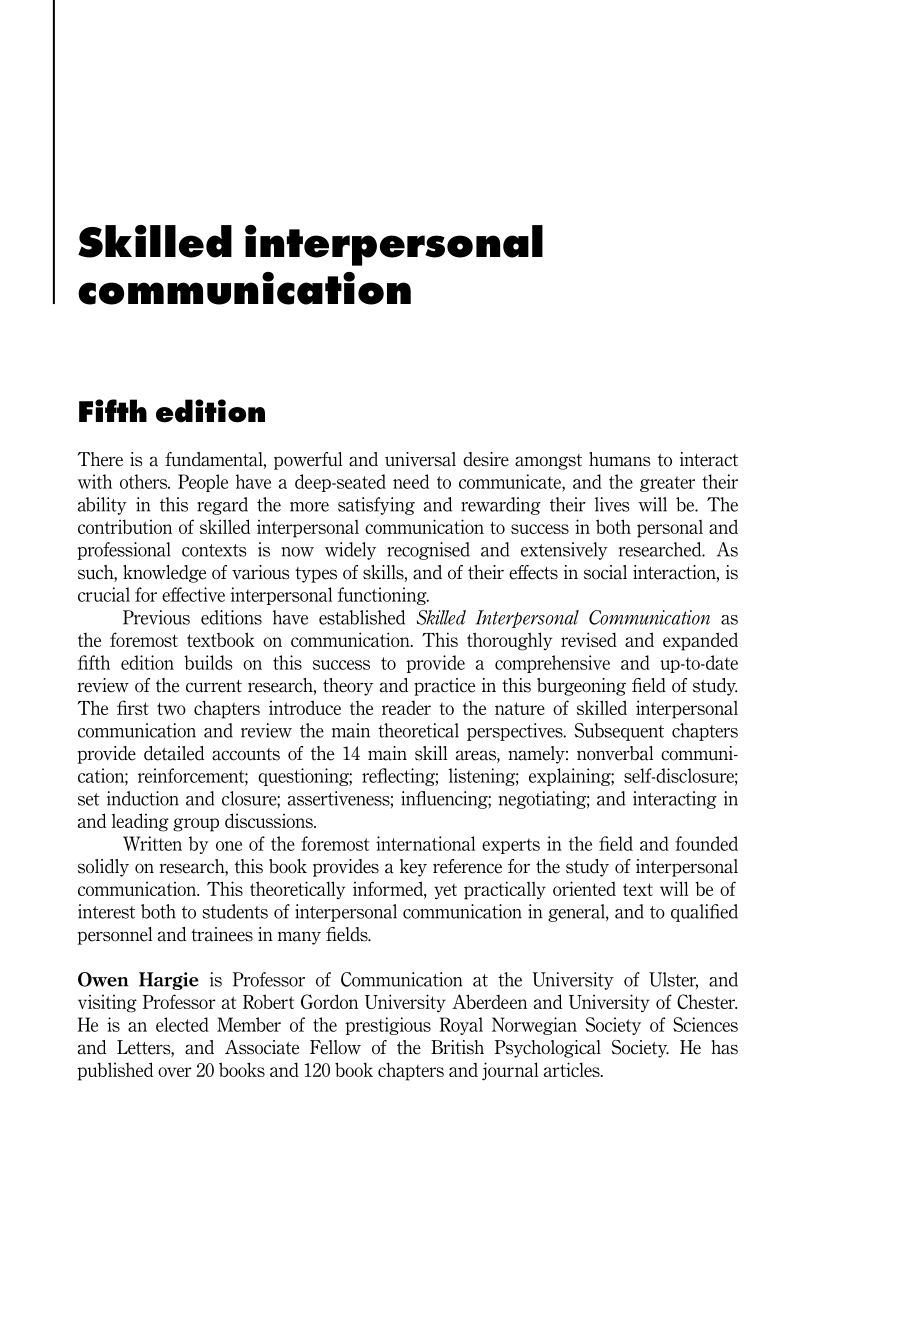 Skilled Interpersonal Communication - Research, Theory and Practice, 5th Edition 2011_第2页